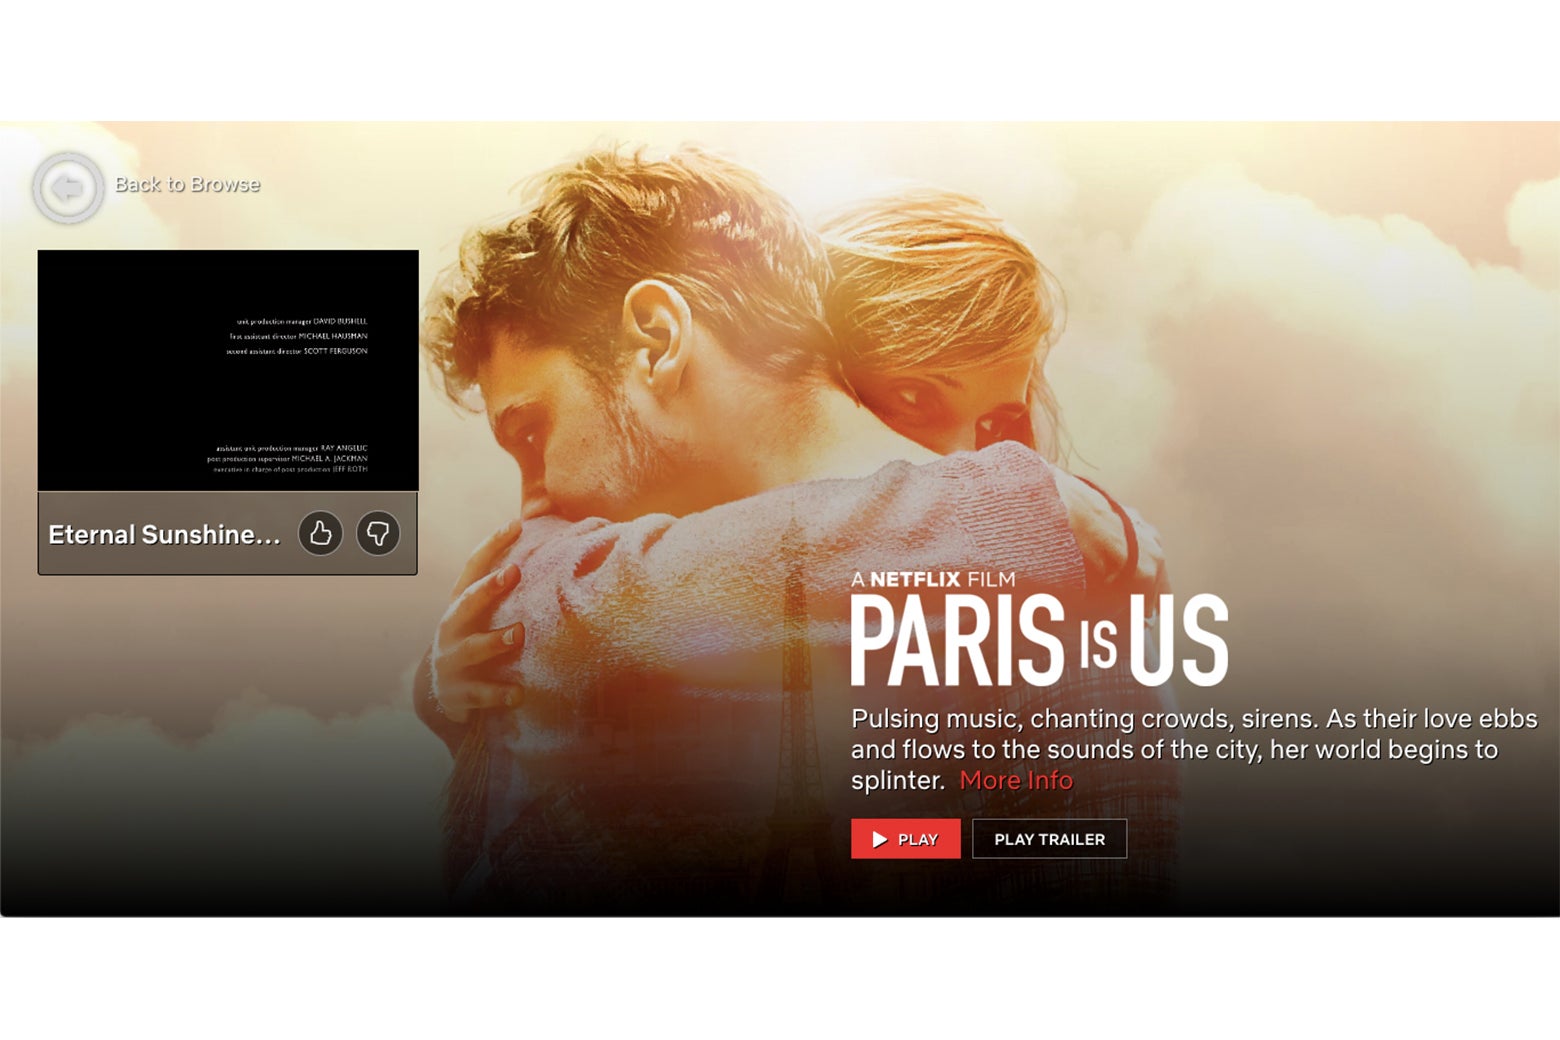 The ending of Eternal Sunshine of the Spotless Mind, buried in an ad for Paris Is Us.